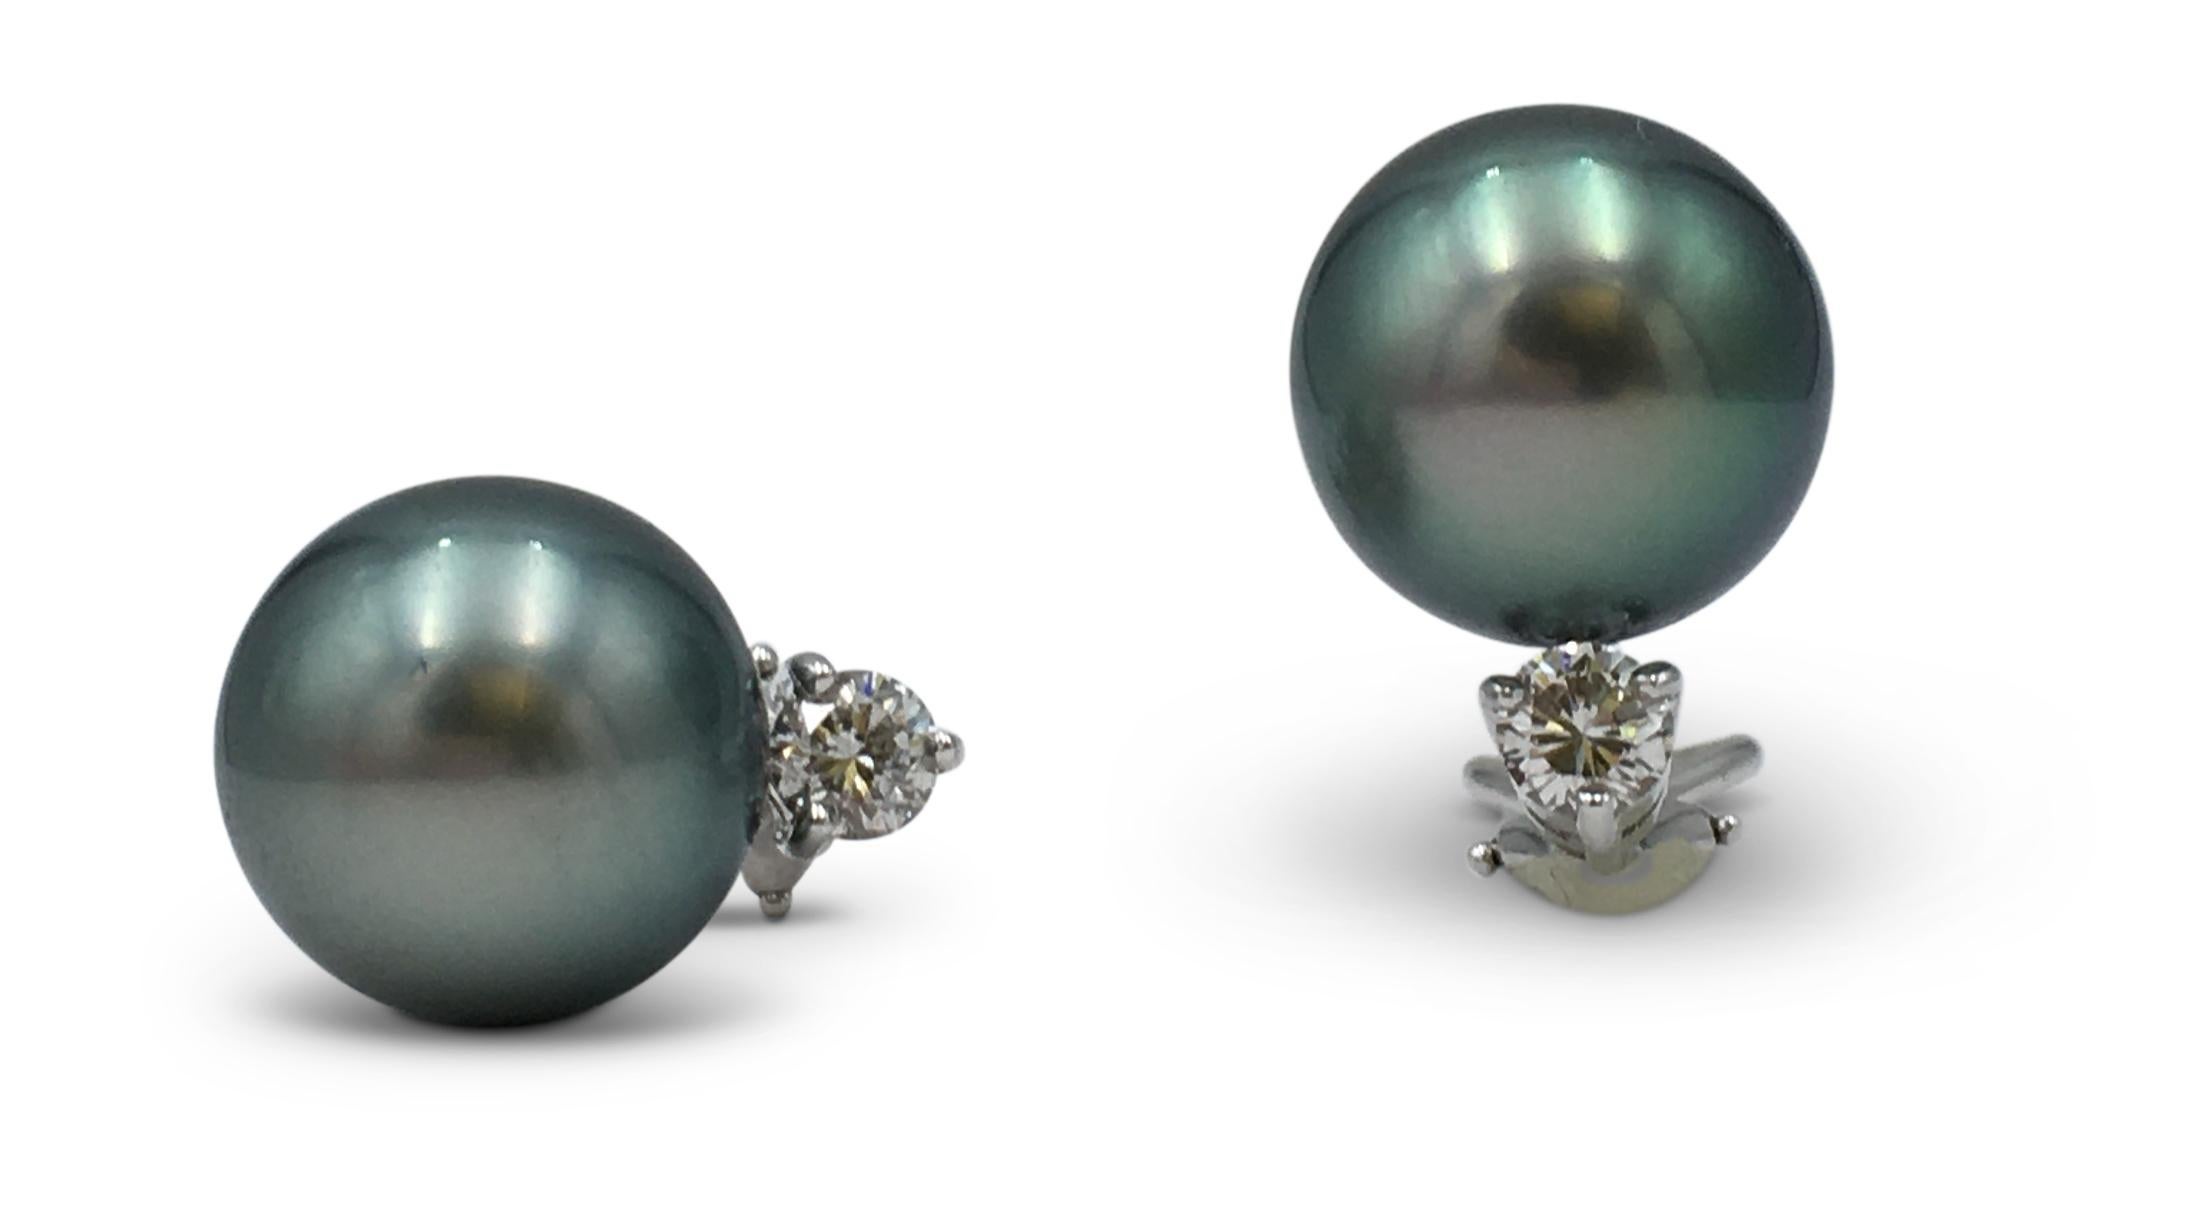 Authentic Mikimoto stud earrings crafted in 18 karat white gold.  Each earring features a stunning 8mm black south sea cultured 'Tahitian' pearl and a round brilliant cut diamond weighing approximately .20ct. Stamped M, 18K, 1338.  CIRCA